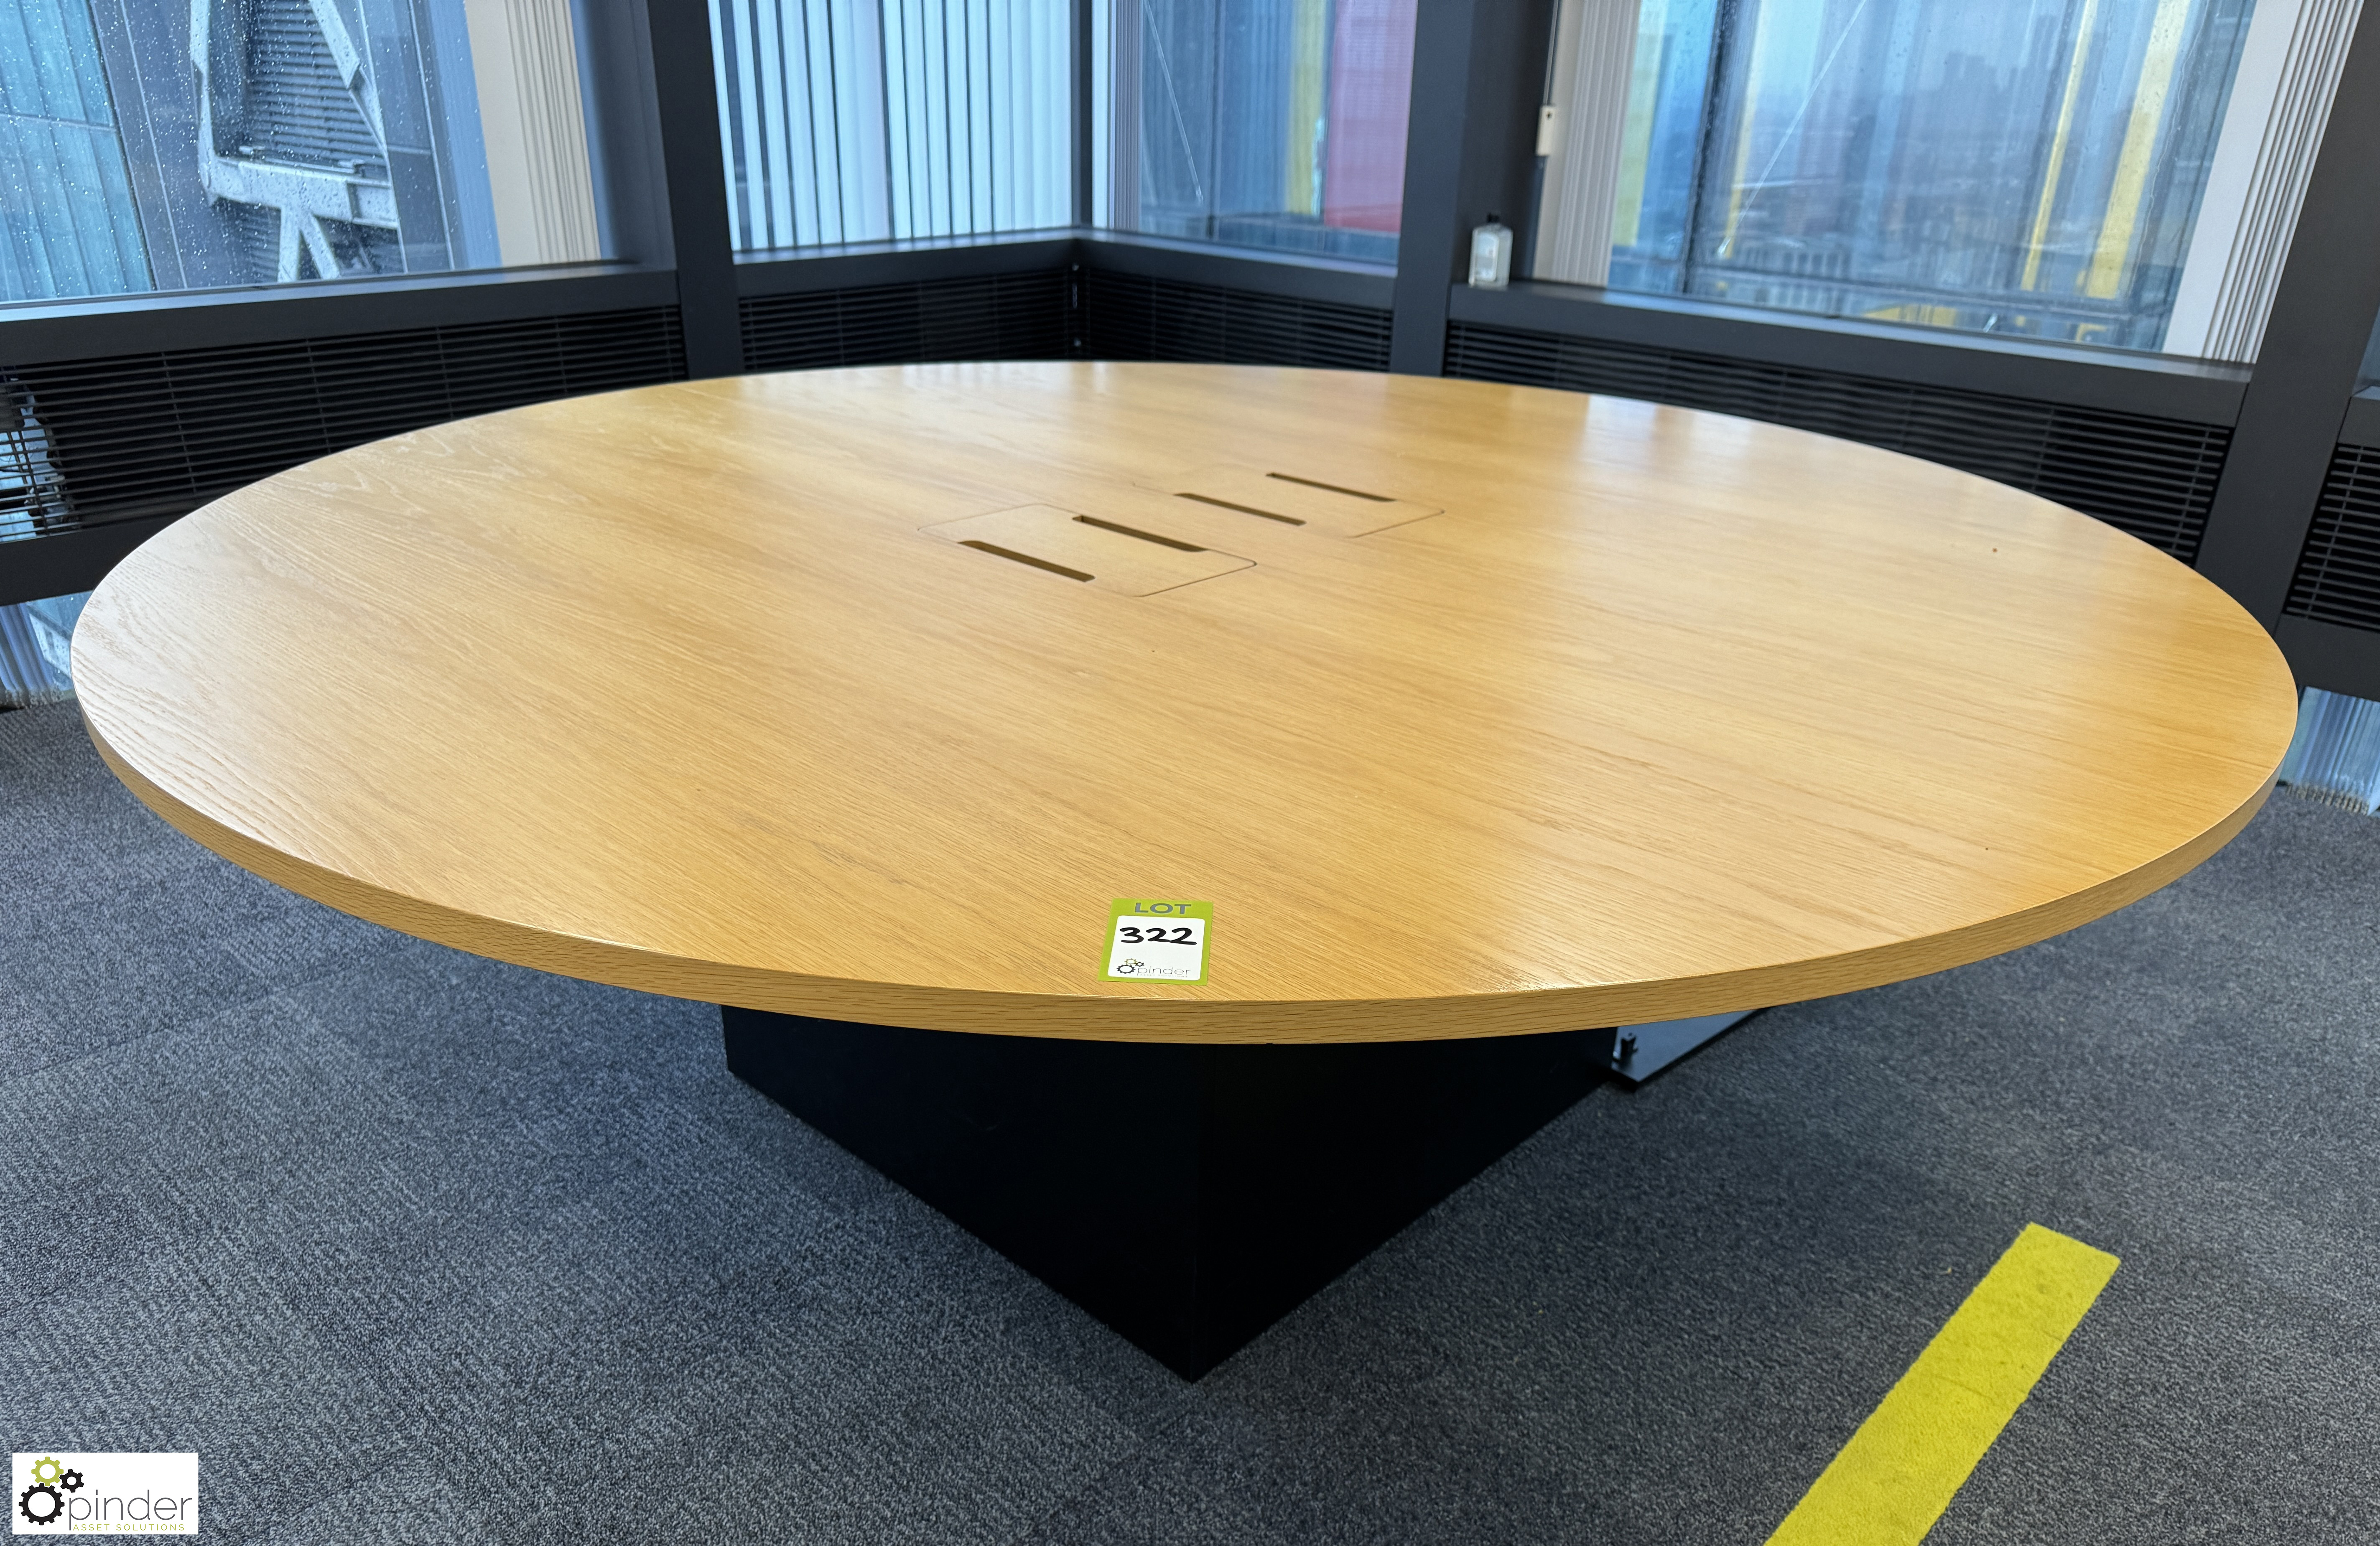 Light oak veneer circular Meeting Table, 2200mm x 750mm, with cable management and base (location in